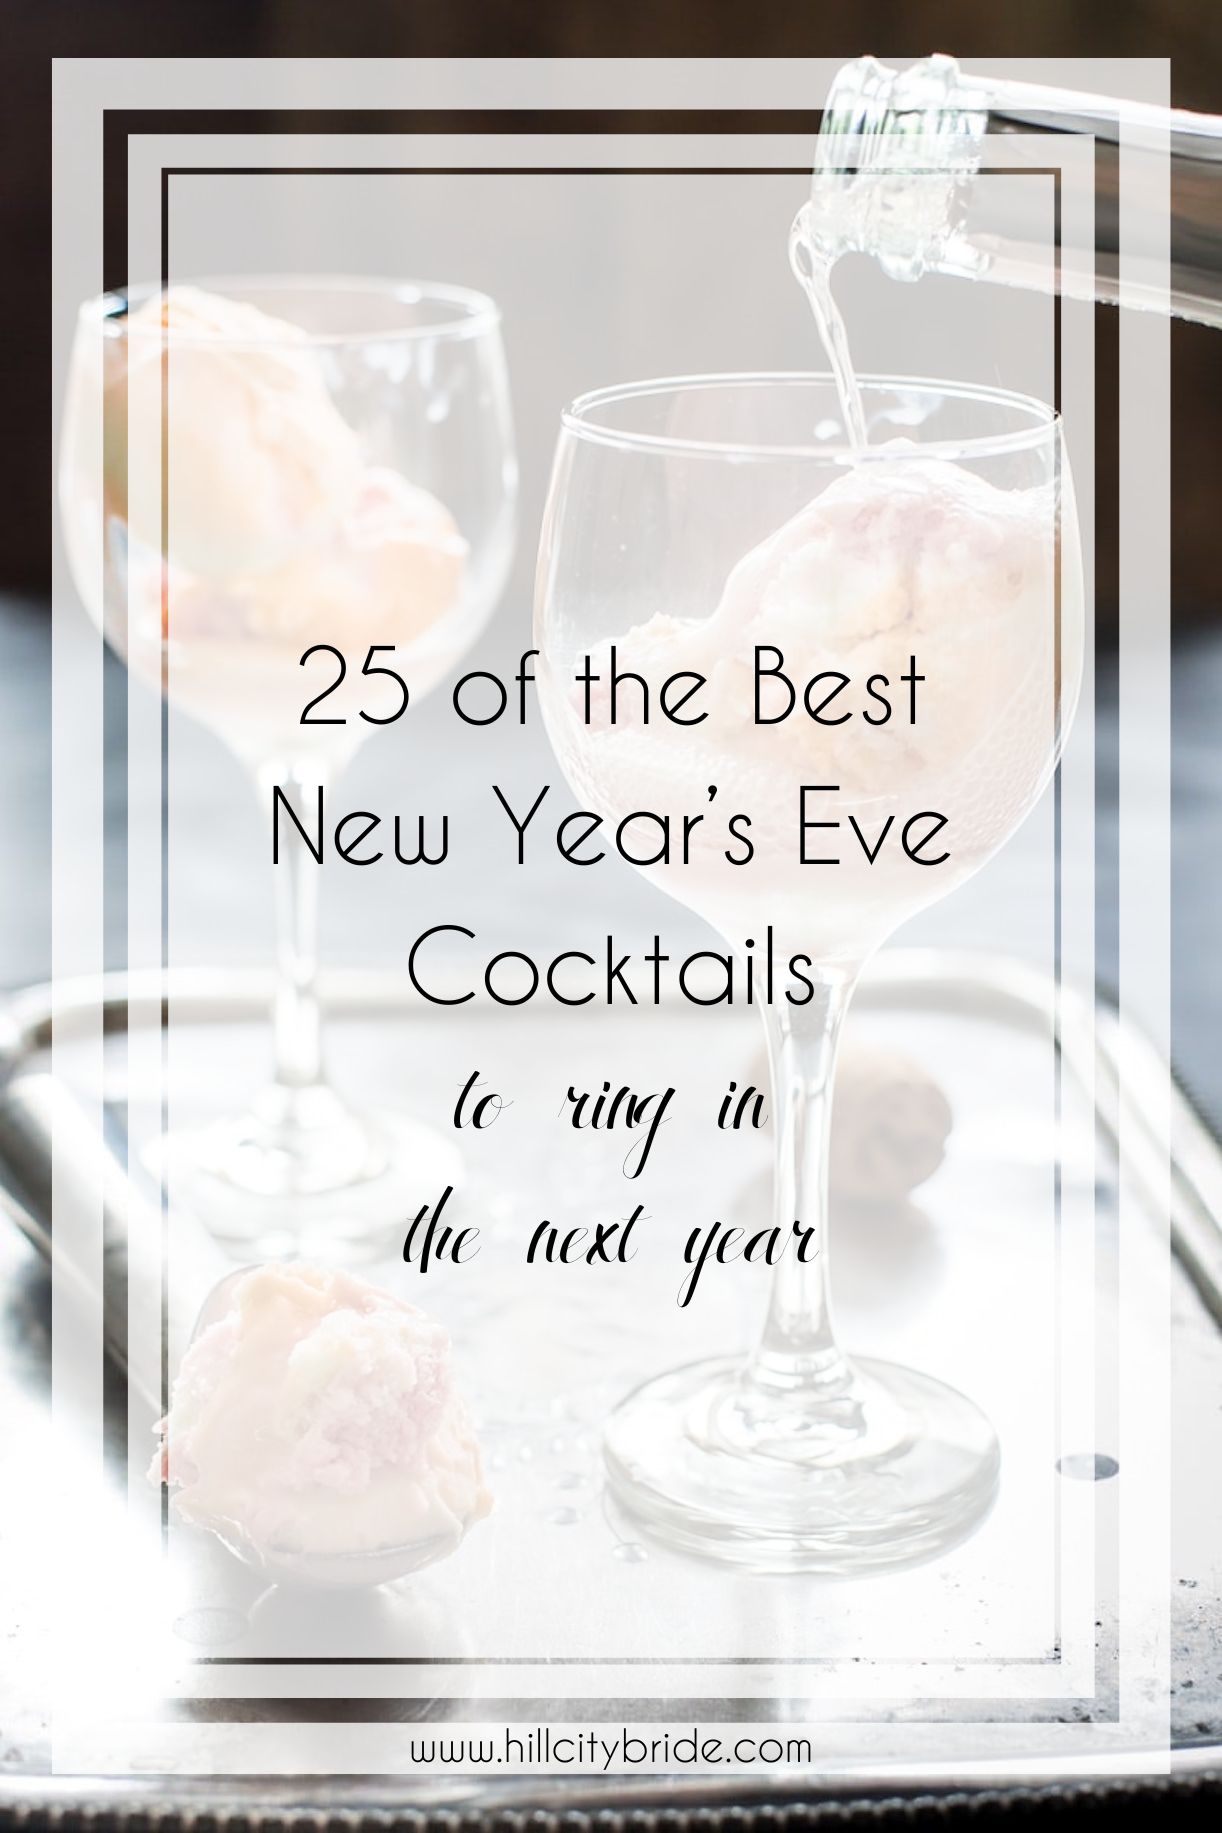 https://hillcitybride.com/wp-content/uploads/2020/12/09-39758-post/25-of-the-Best-Cocktail-Recipes-to-Make-as-New-Years-Eve-Drinks.jpg